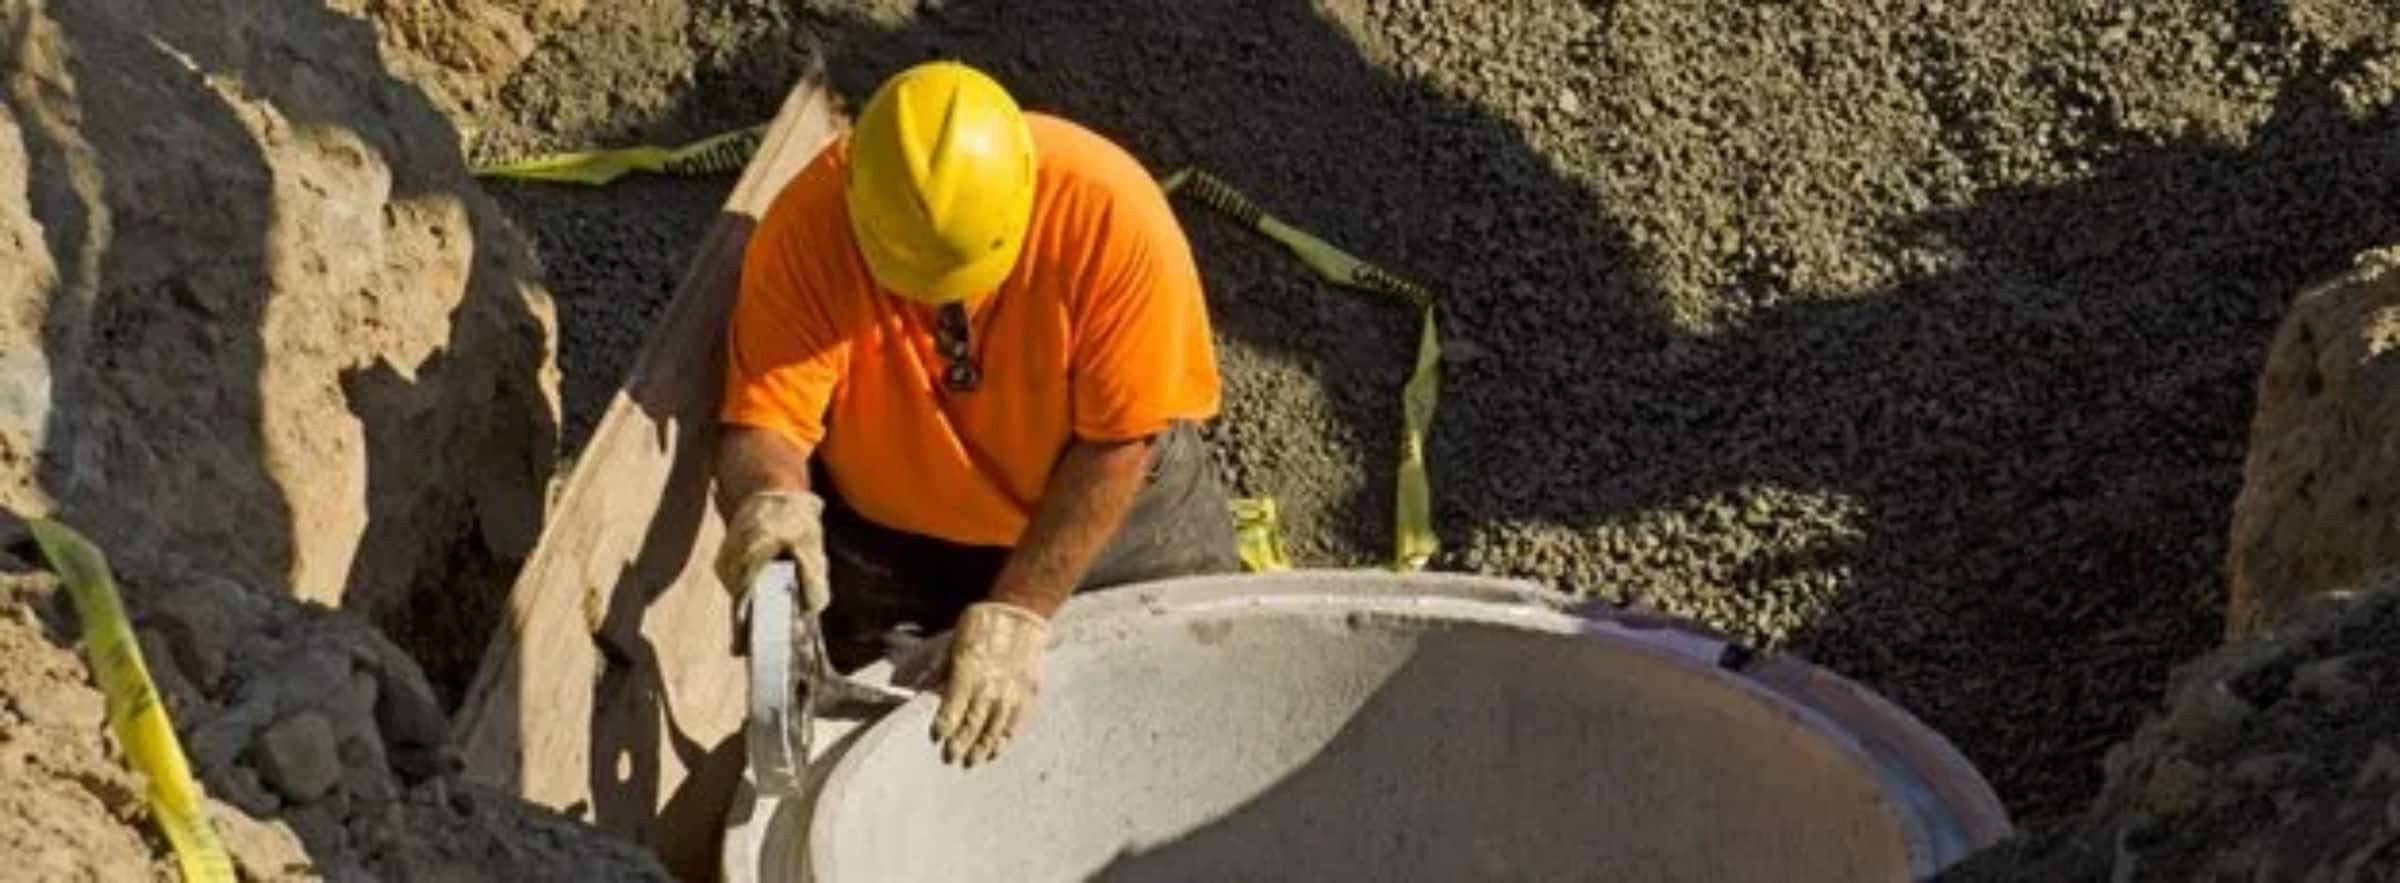 J&R provides complete septic system installation services, from installation to repair to scheduled septic tank pump outs